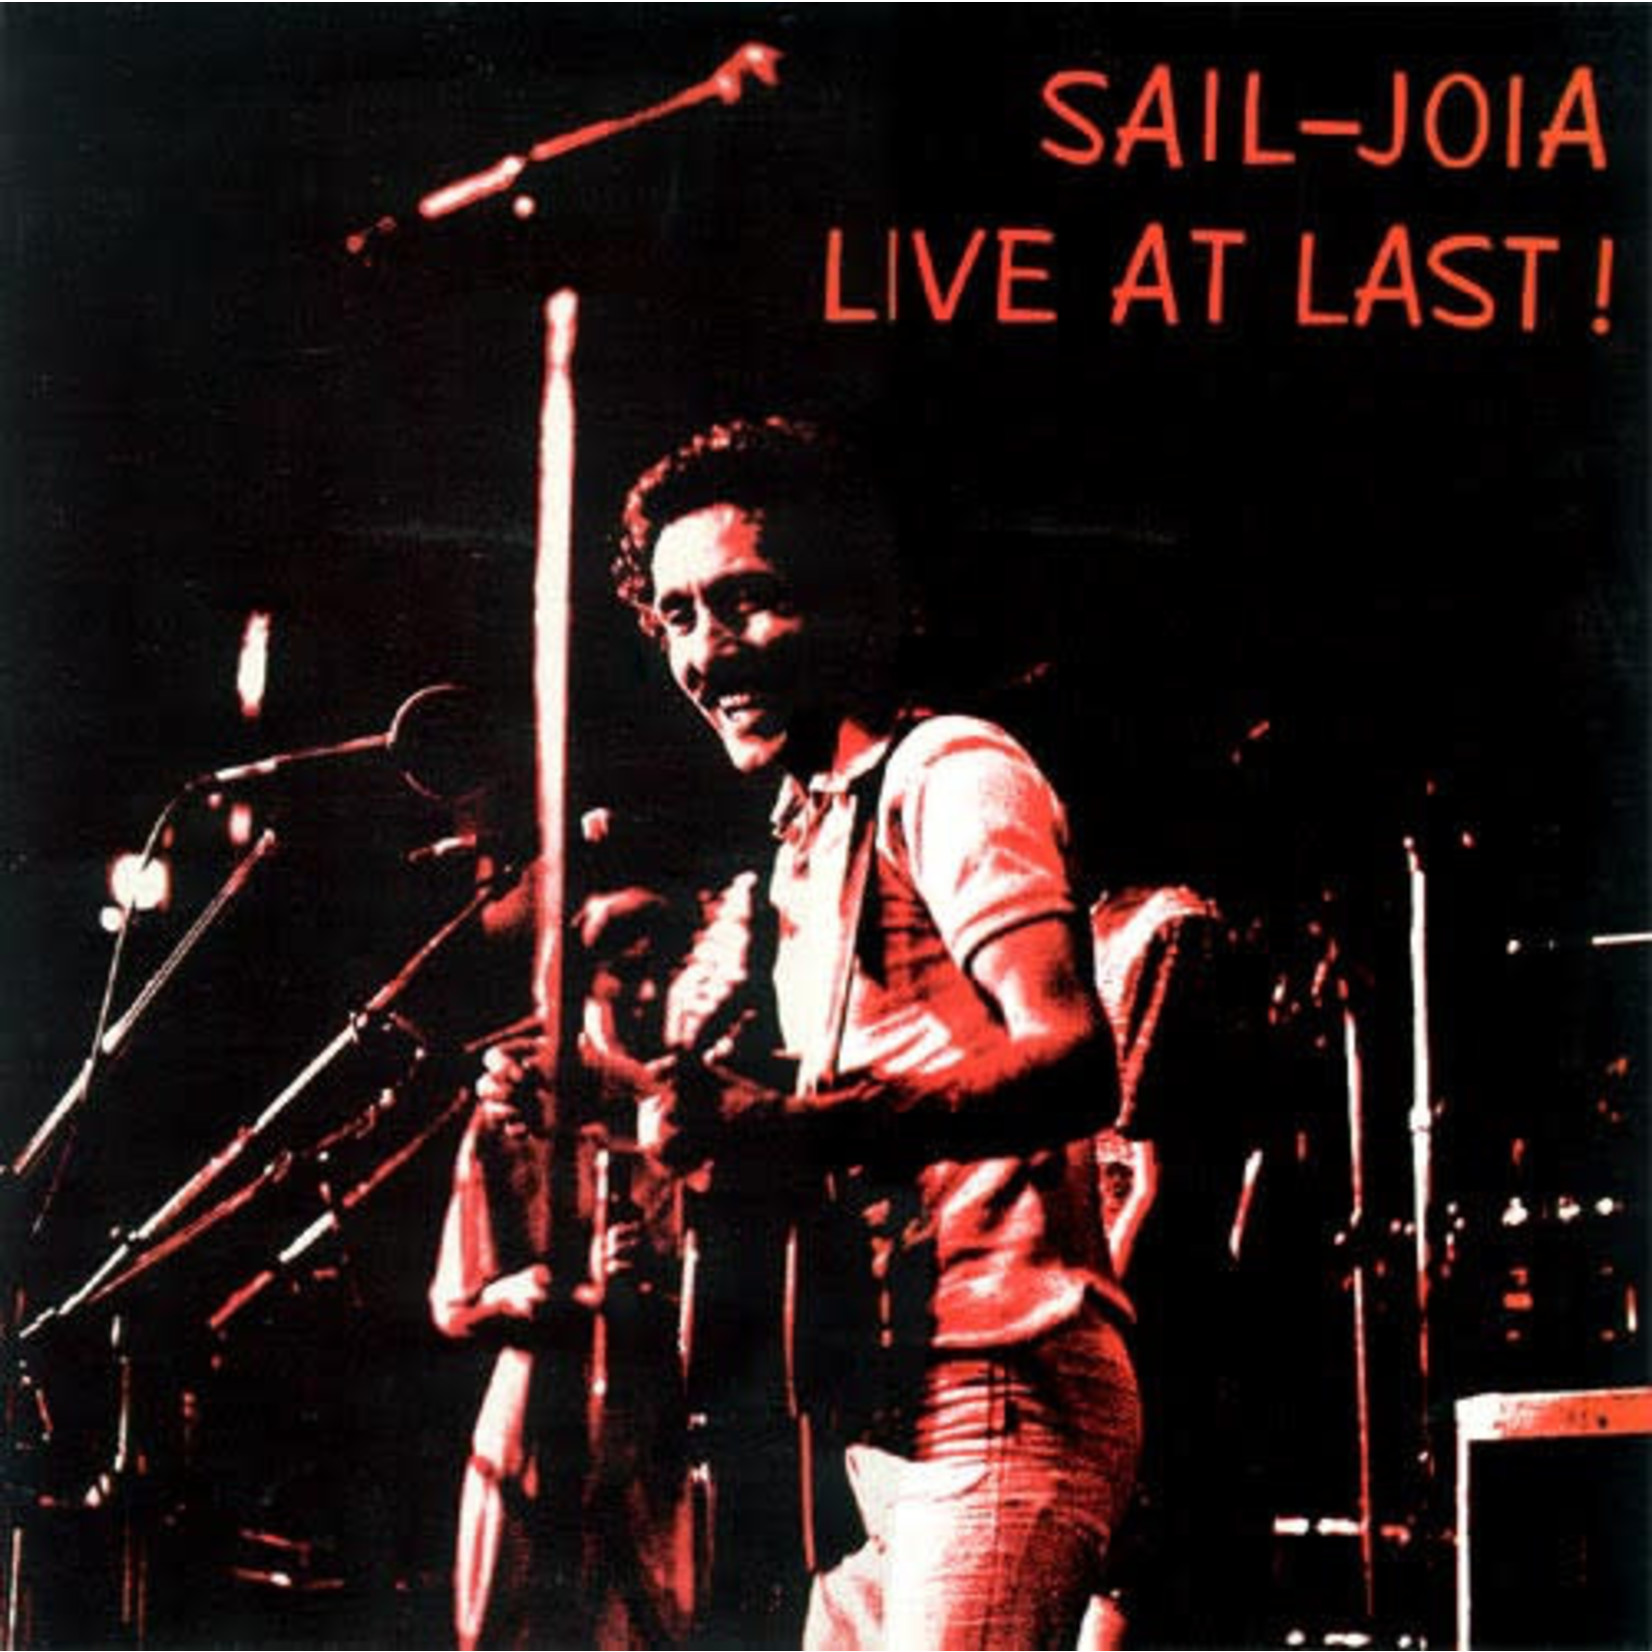 SAIL-JOIA - LIVE AT LAST!